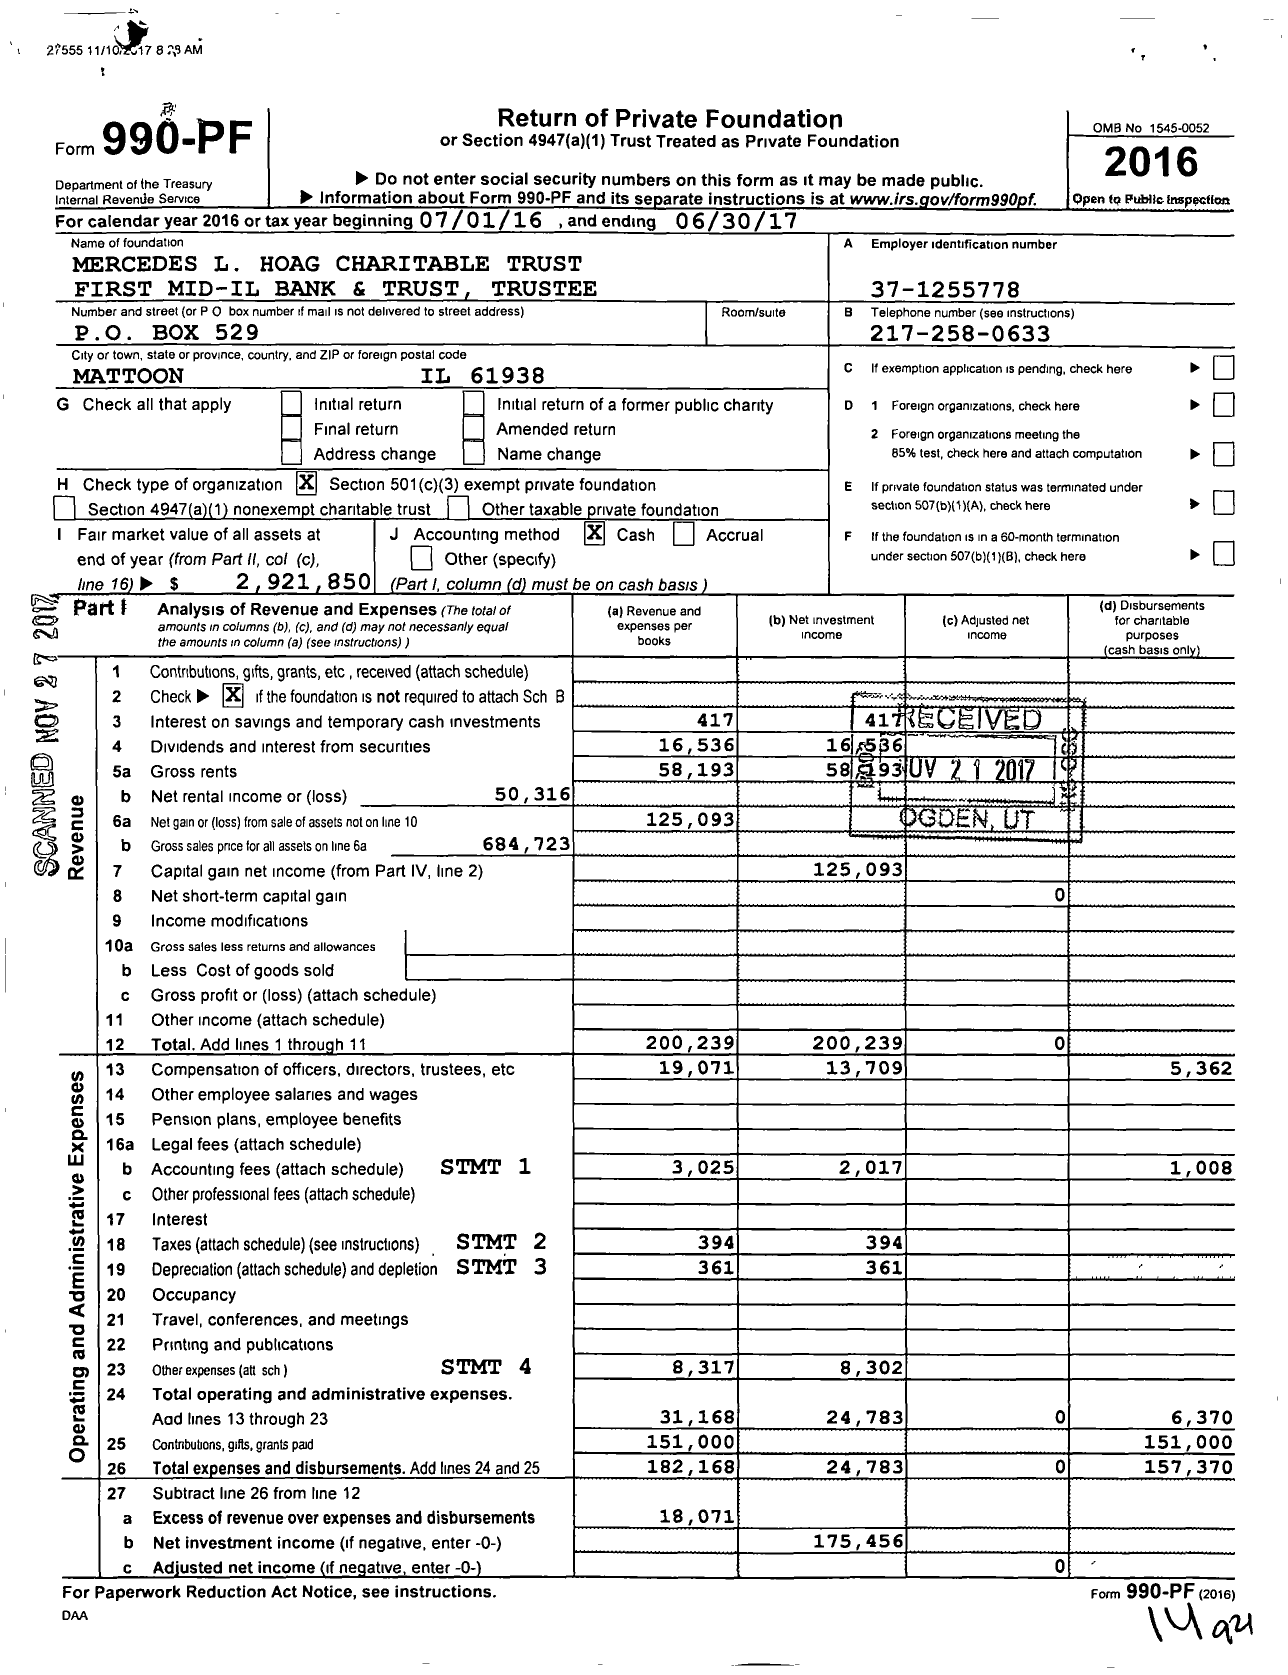 Image of first page of 2016 Form 990PF for Mercedes L Hoag Charitable Trust First Mid Wealth MGMT Trustee